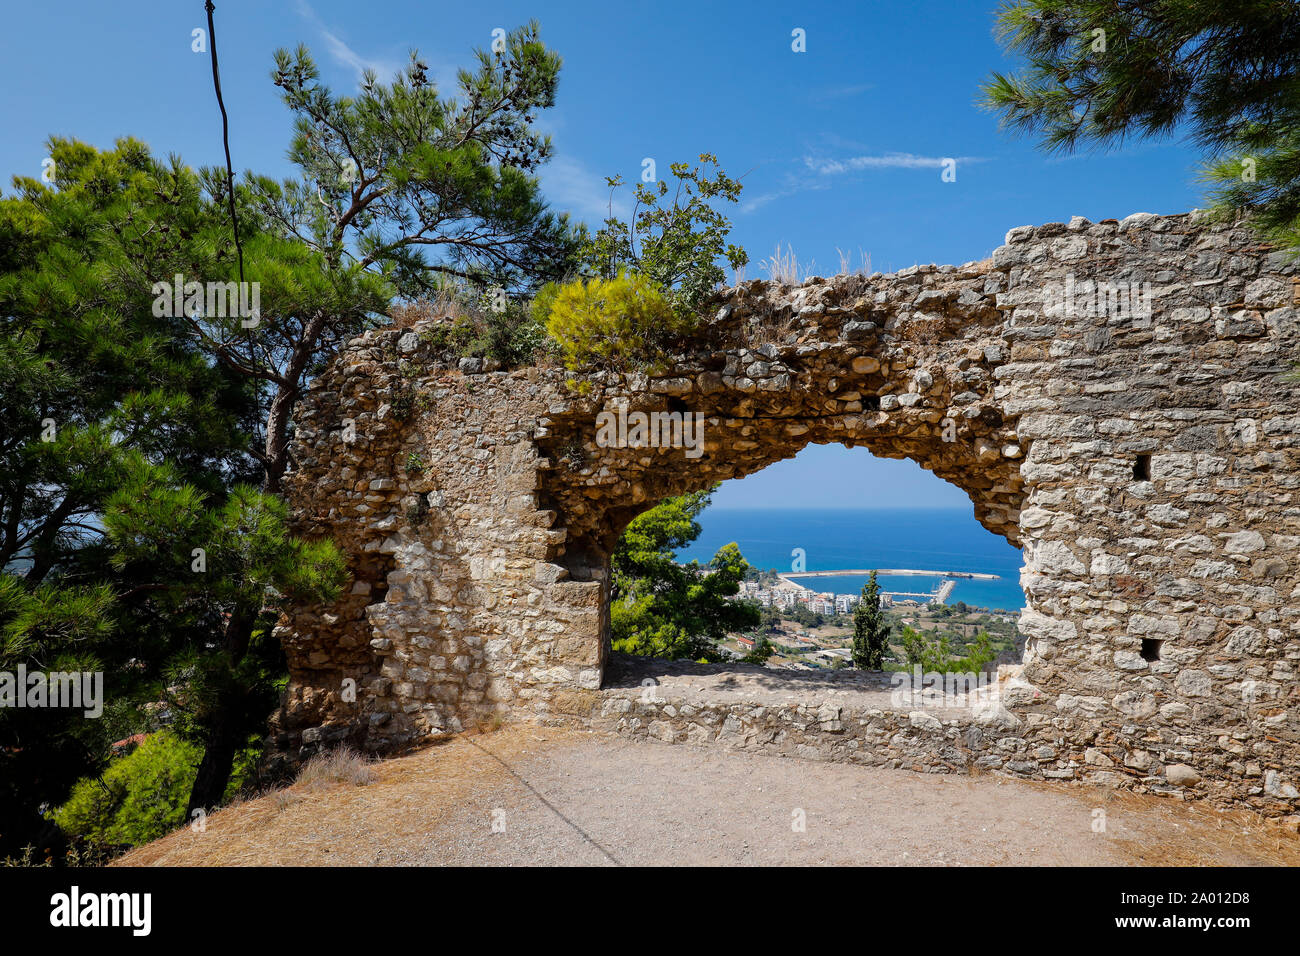 Kyparissia, Messinia, Peloponnese, Greece - Castle ruin with a view of the coastal town of Kyparissia.  Kyparissia, Messenien, Peloponnes, Griechenlan Stock Photo